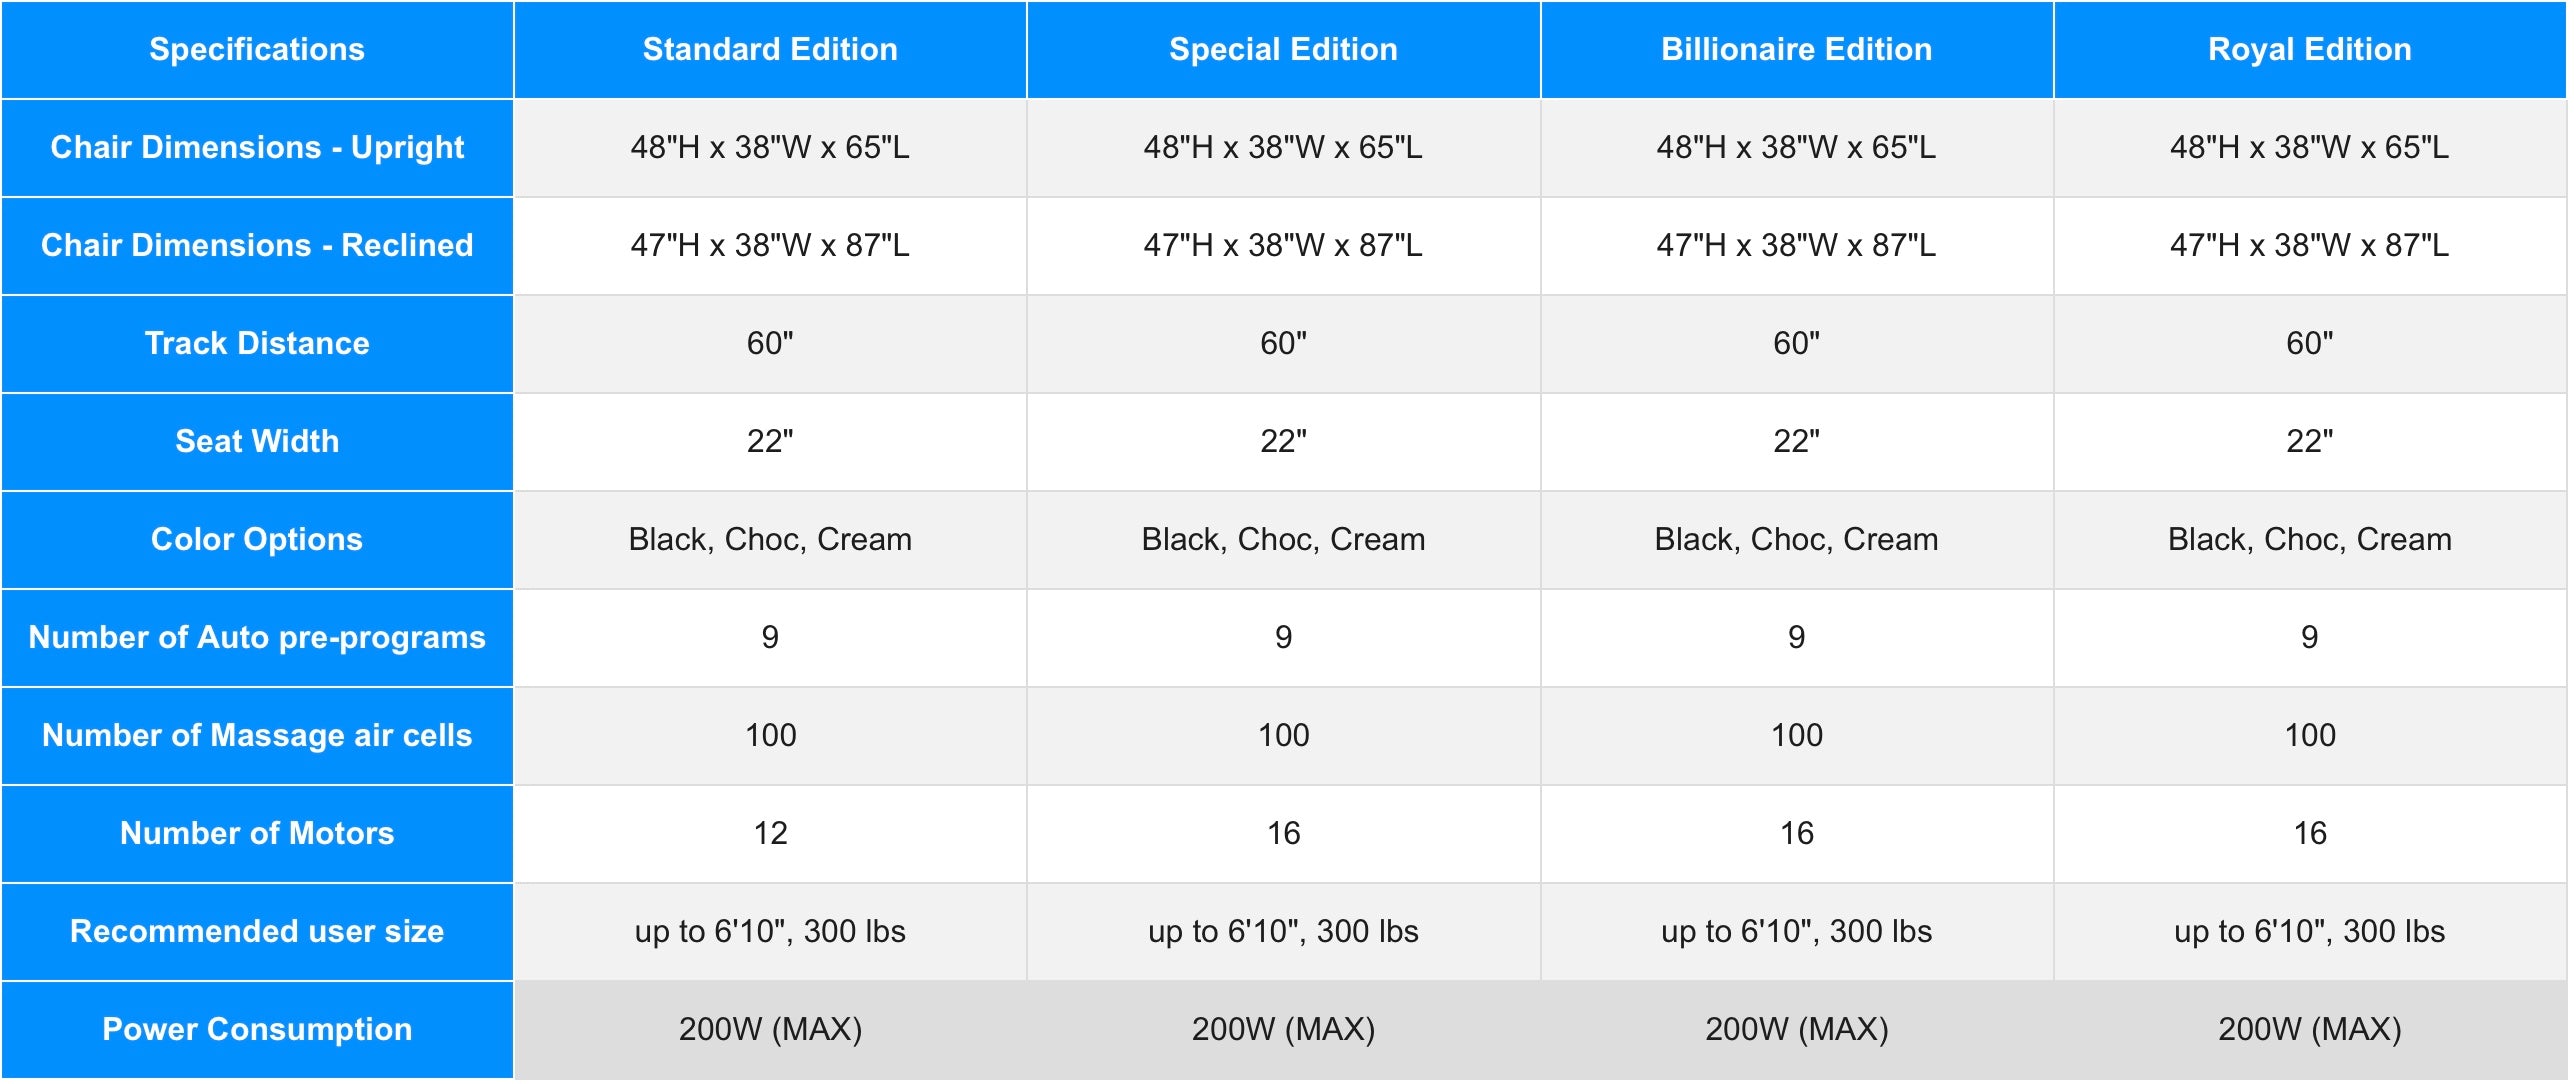 Luraco i9 Max Special Specifications